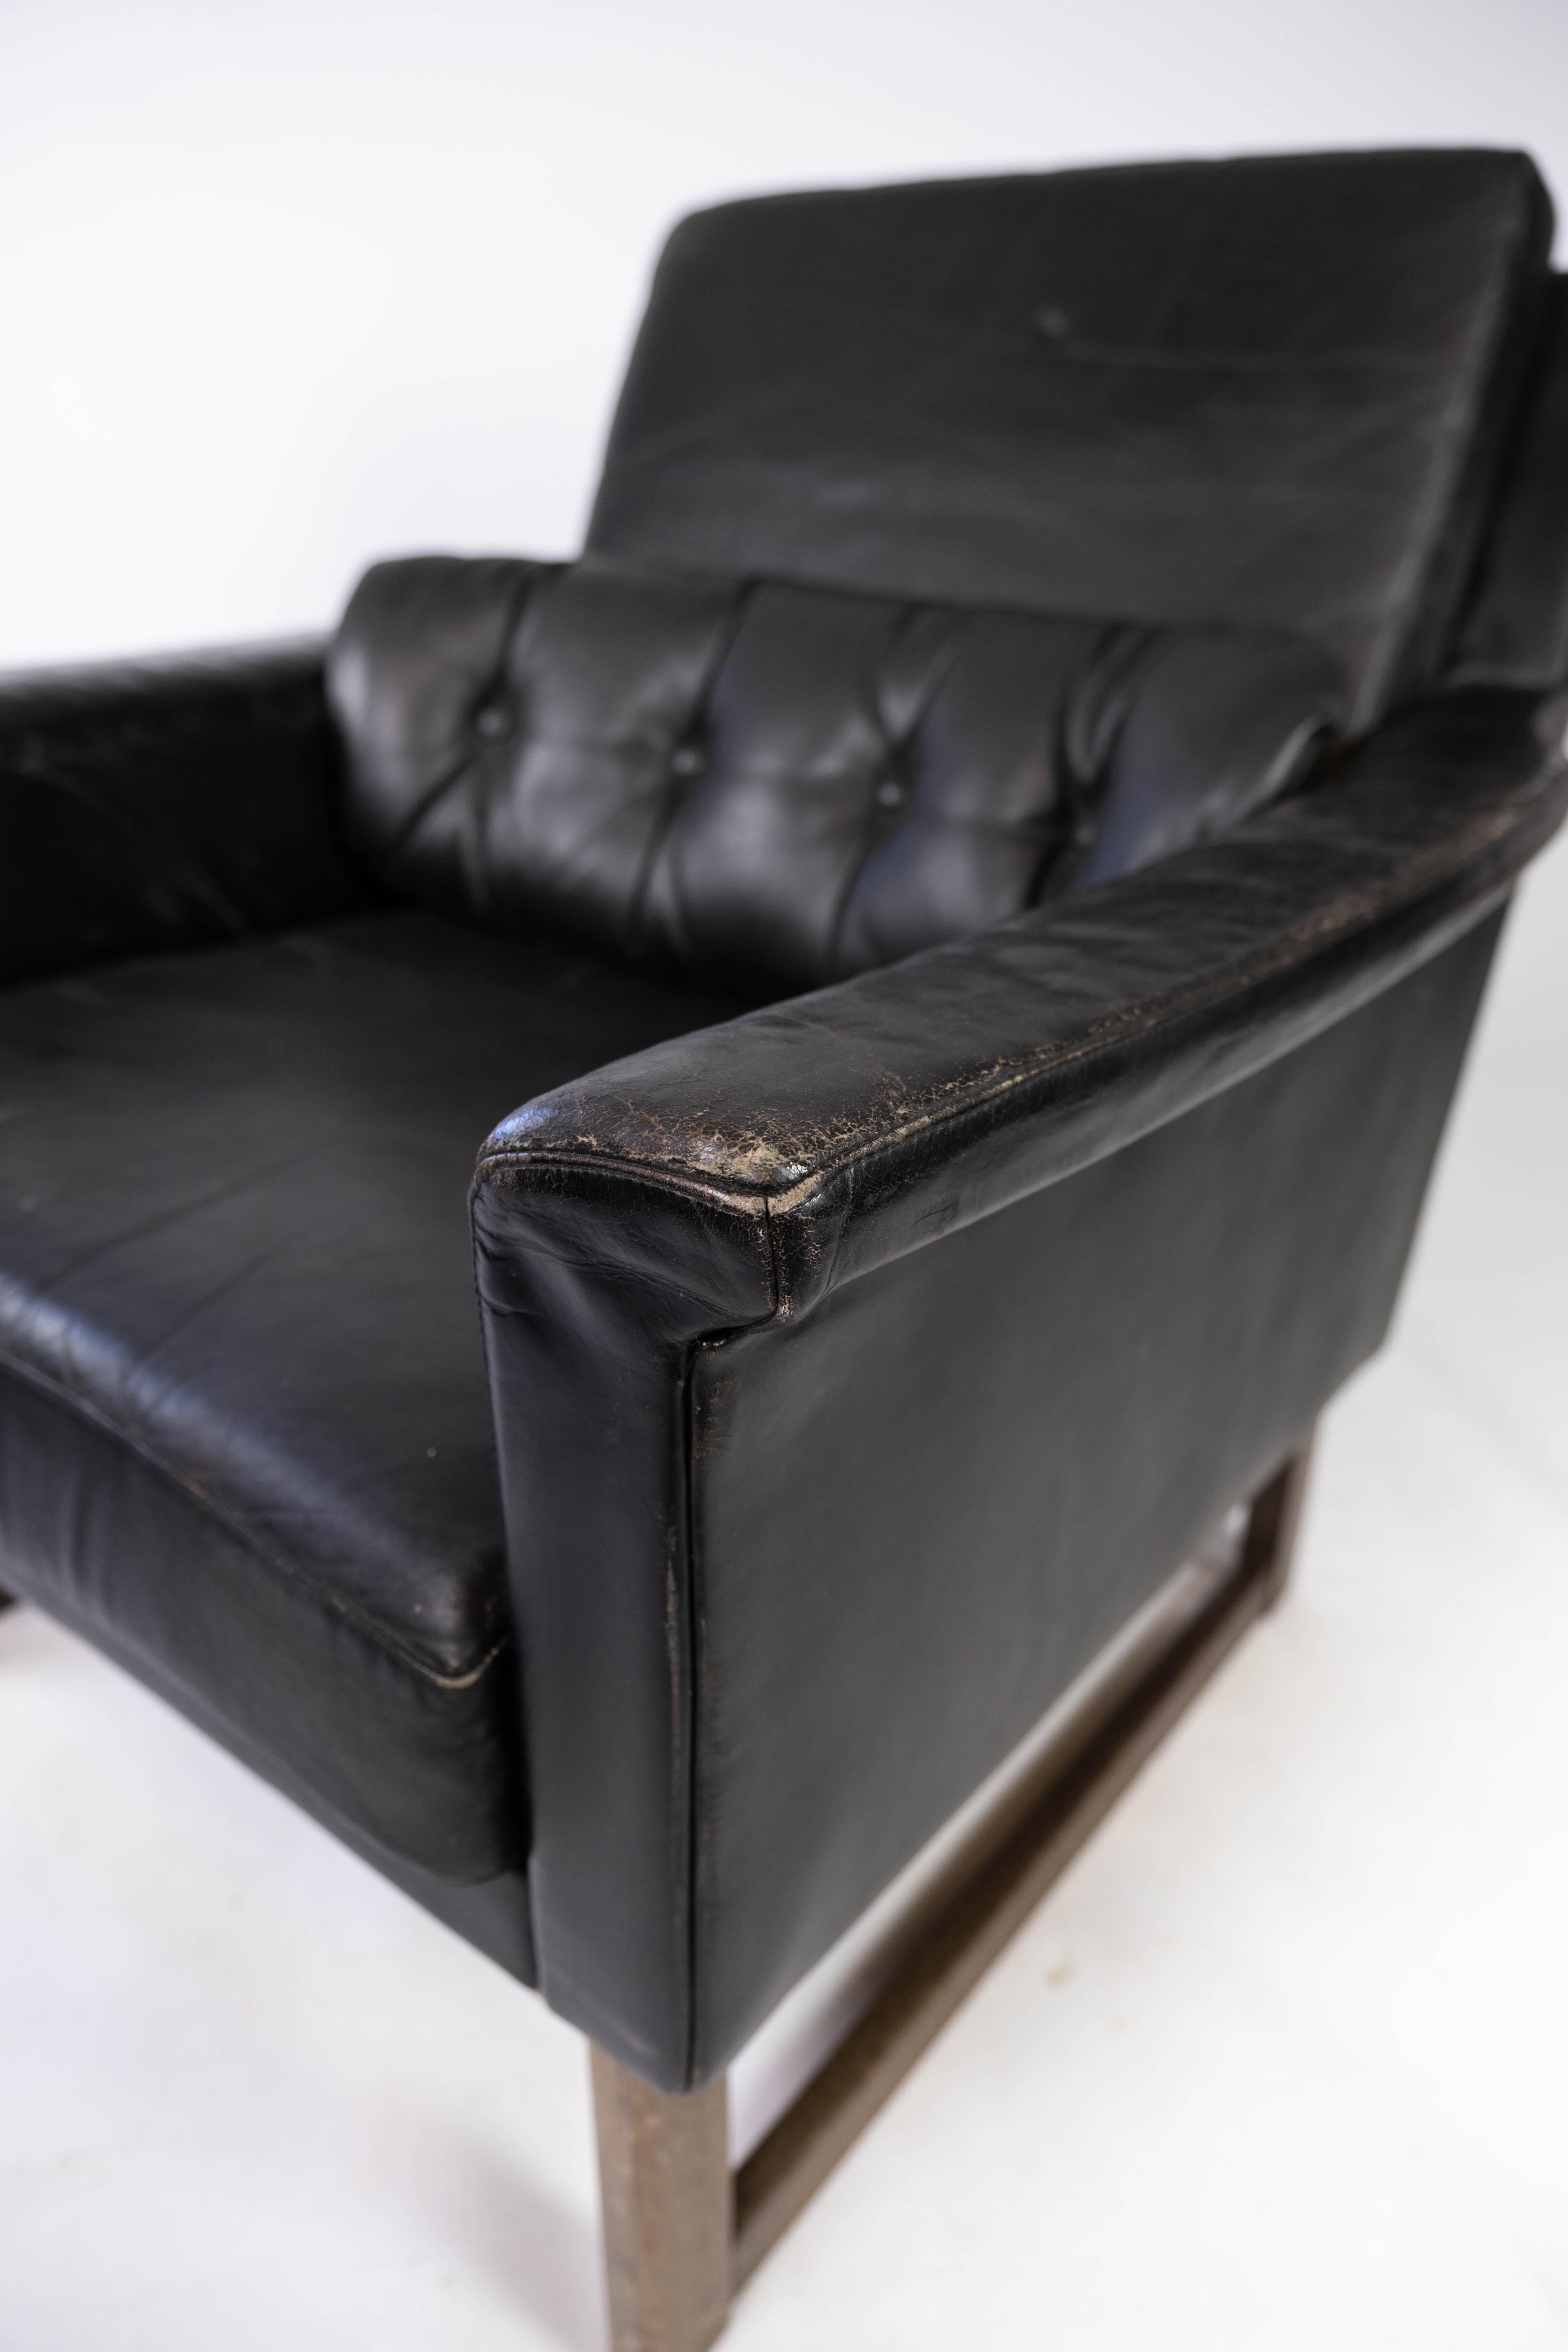 Easy Chair Upholstered with Black Leather and Legs in Wood, by Illum Wikkelsø 1